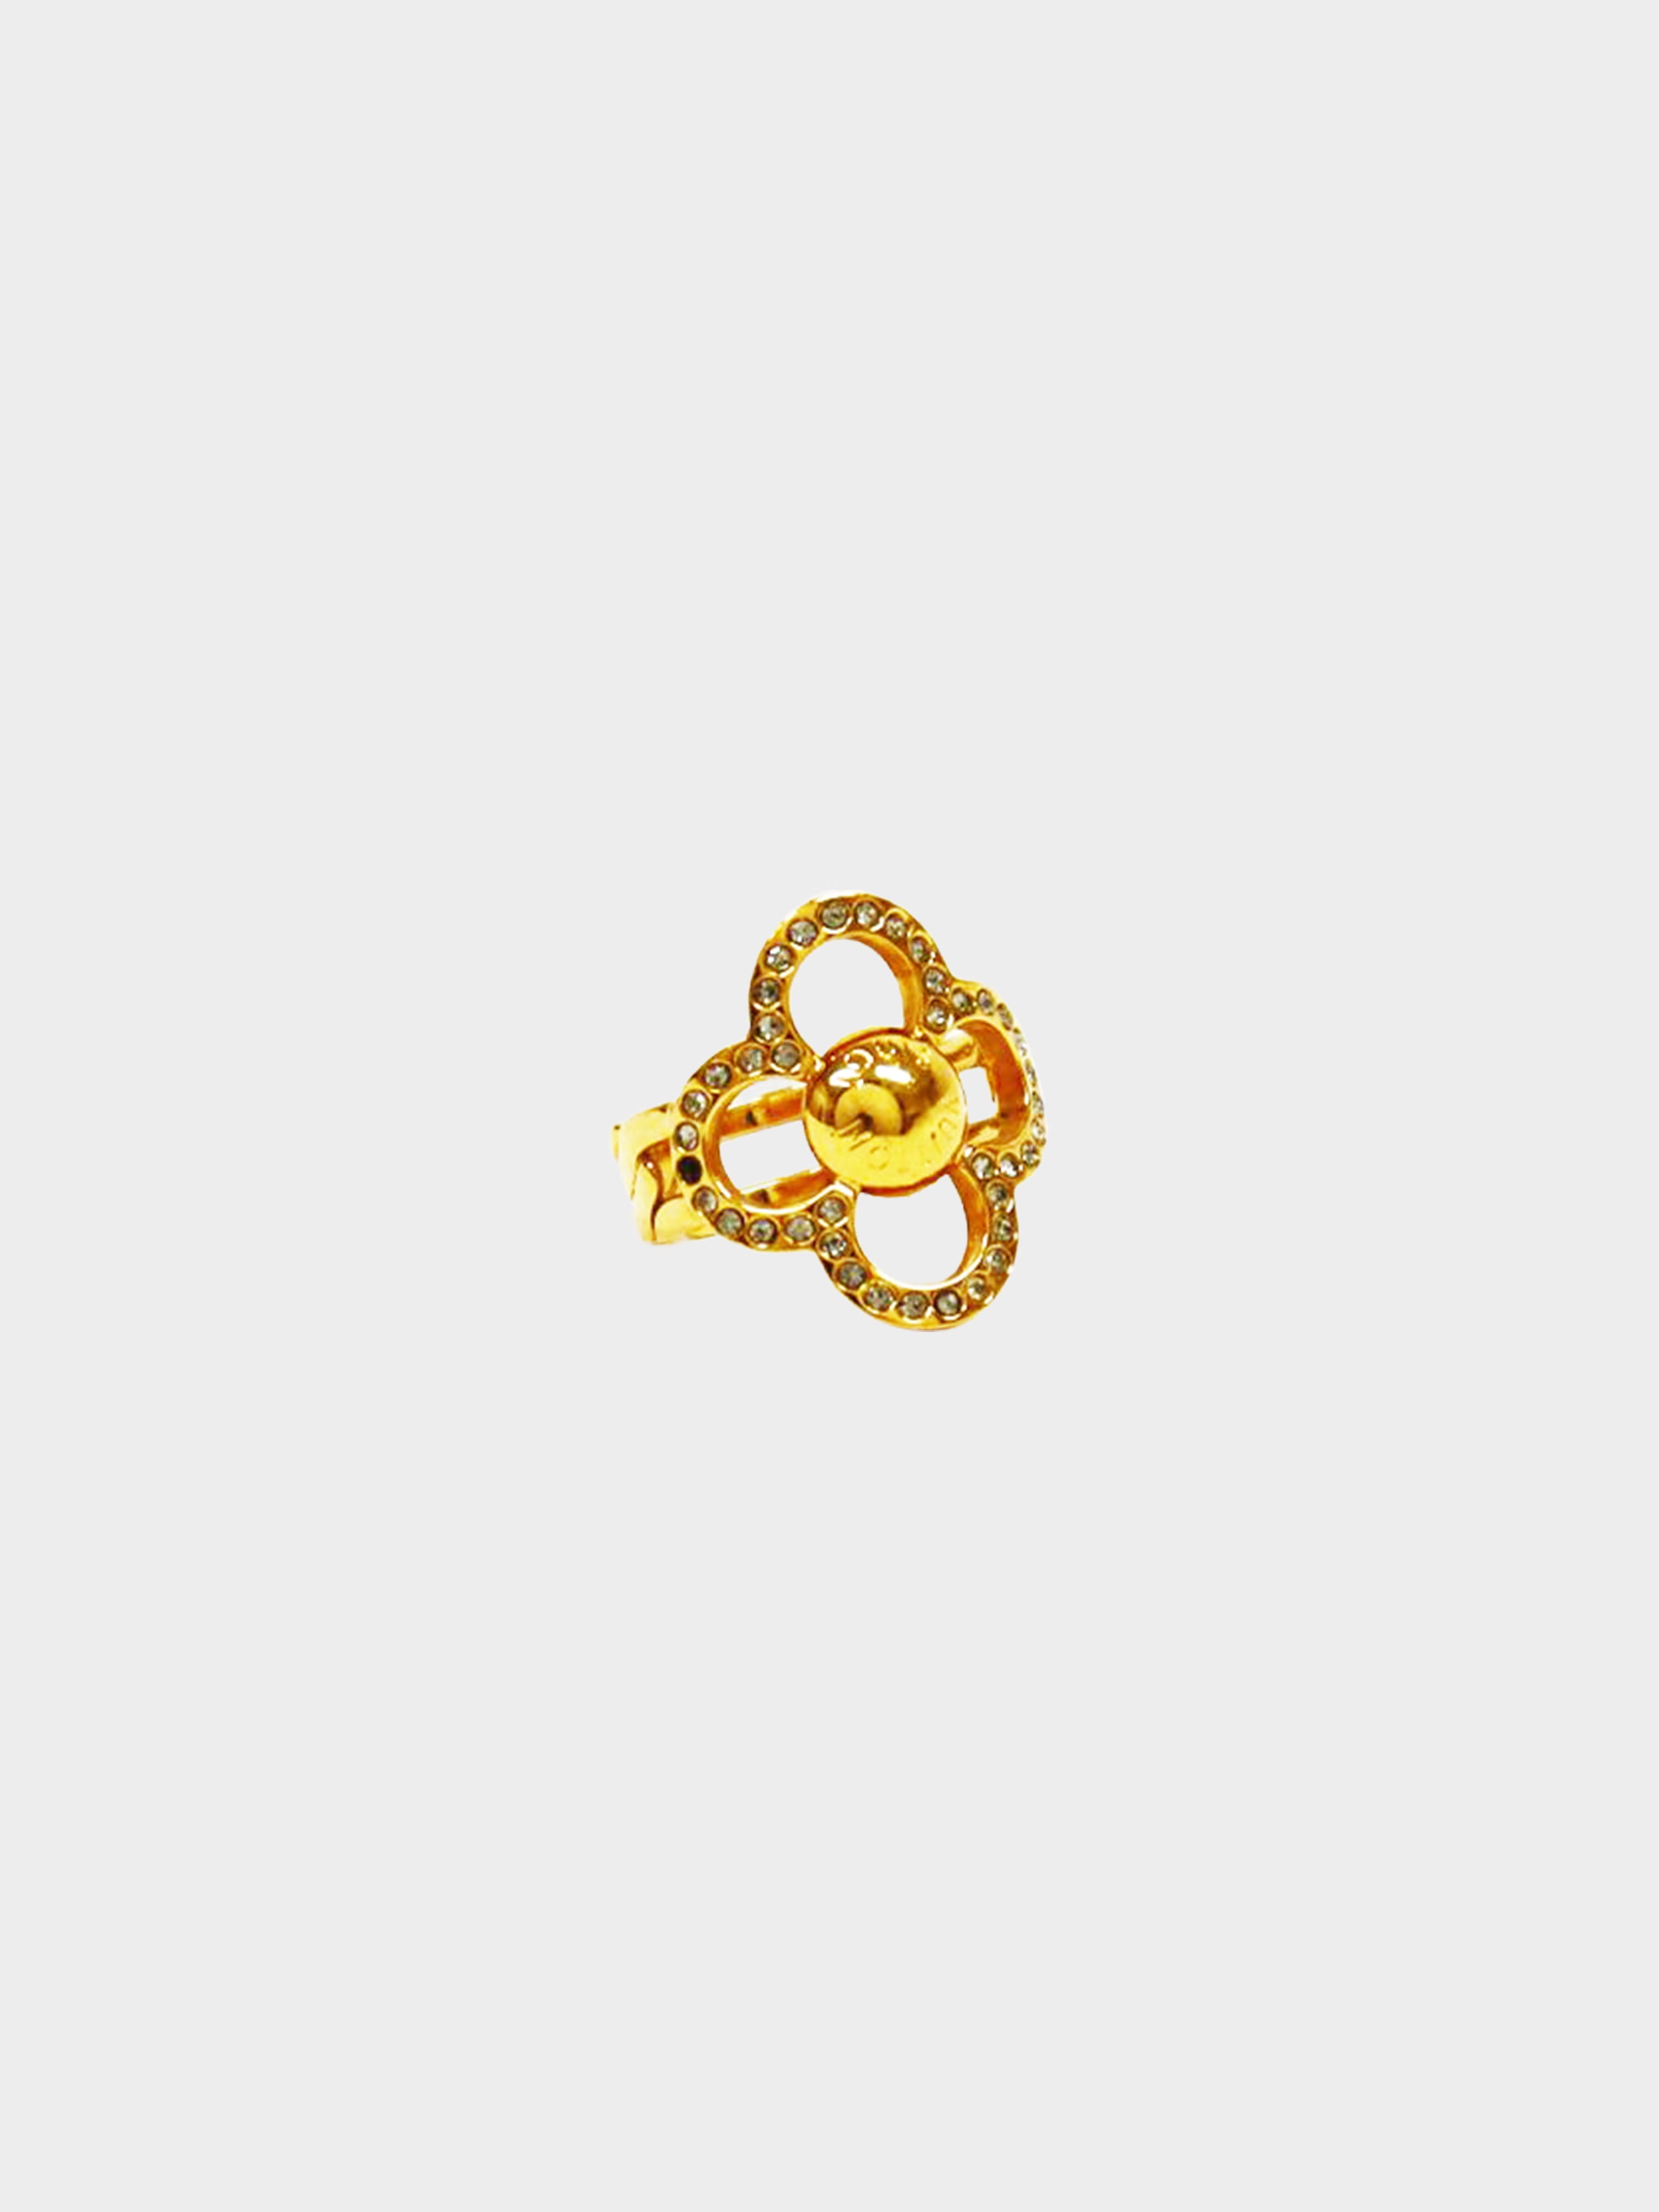 Couture Upscale Consign - LOUIS VUITTON: ESSENTIAL V RING GOLD FINISHED  BRASS. #lv#lvessential #lvring #lvessentialv #lvjewlery #accesorios  #lvaddict#lvlover#louisvuittonlover # #style #purselover #botd  #fortlauderdale #coutureupscaleconsign